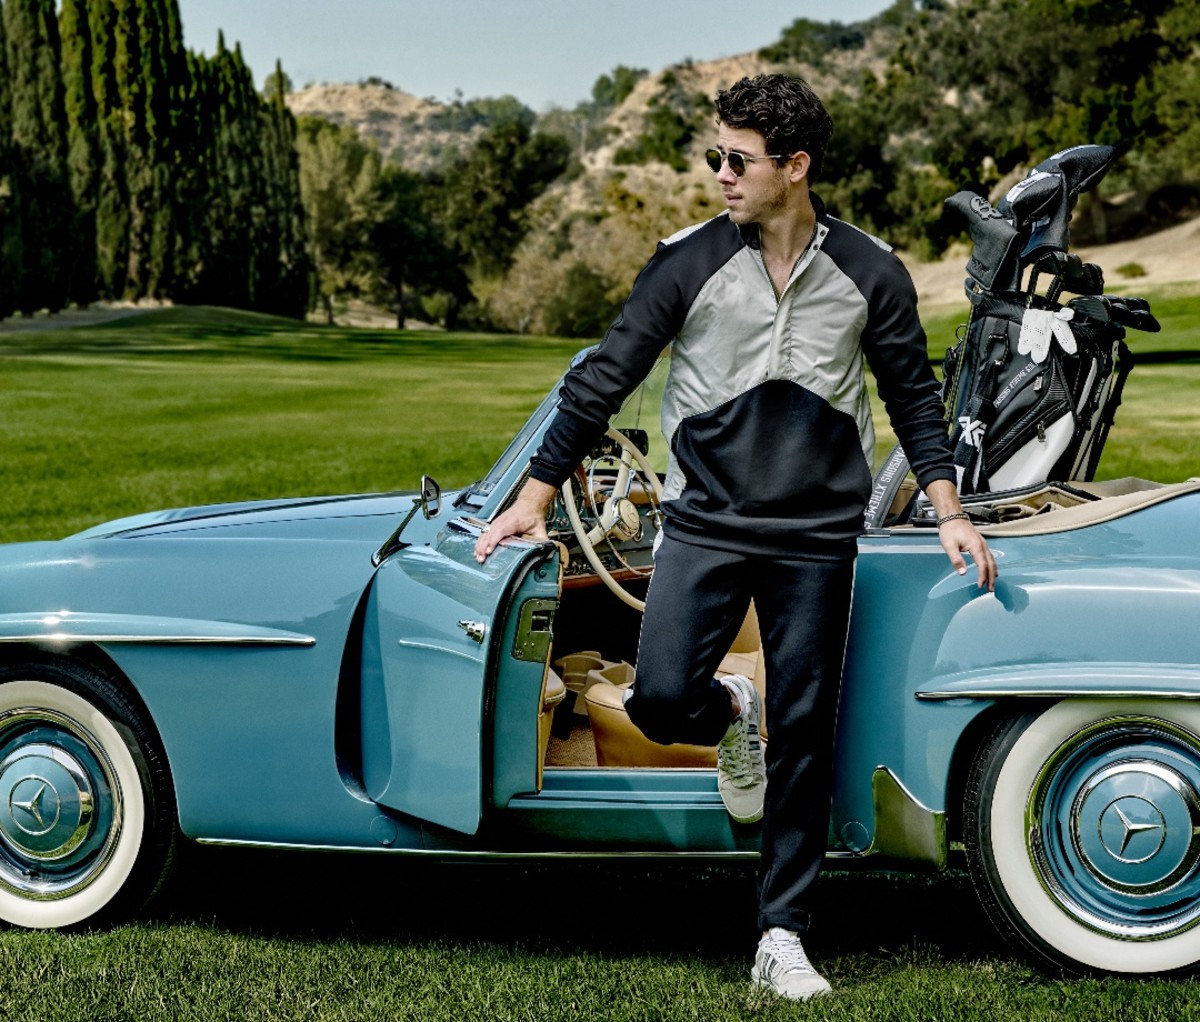 Actor Nick Jonas stepping out of blue vintage sports car on golf course